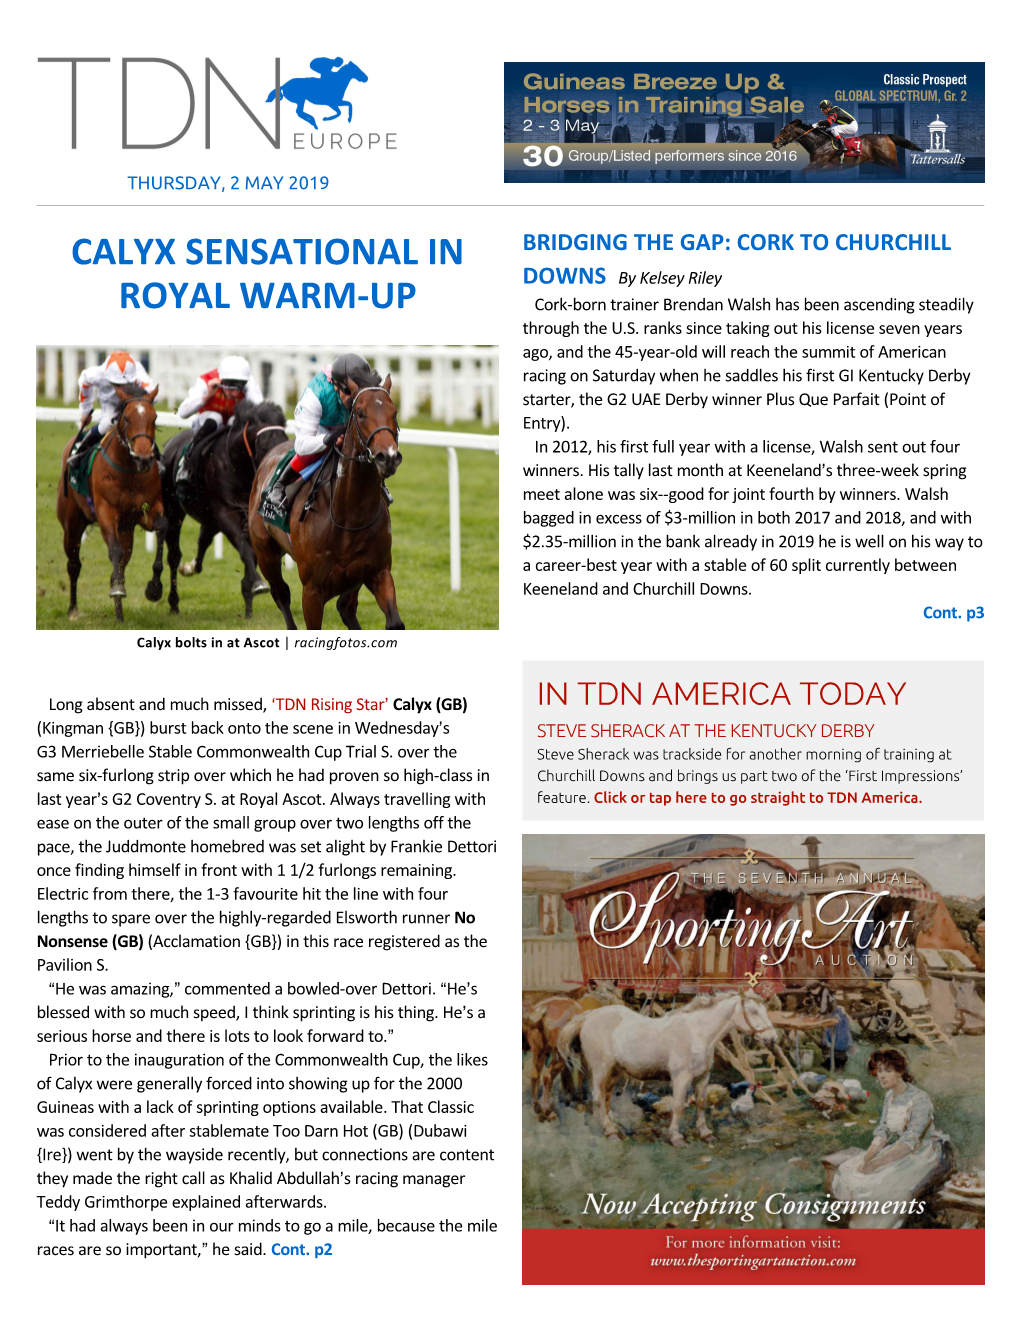 Calyx Sensational in Royal Warm-Up Cont